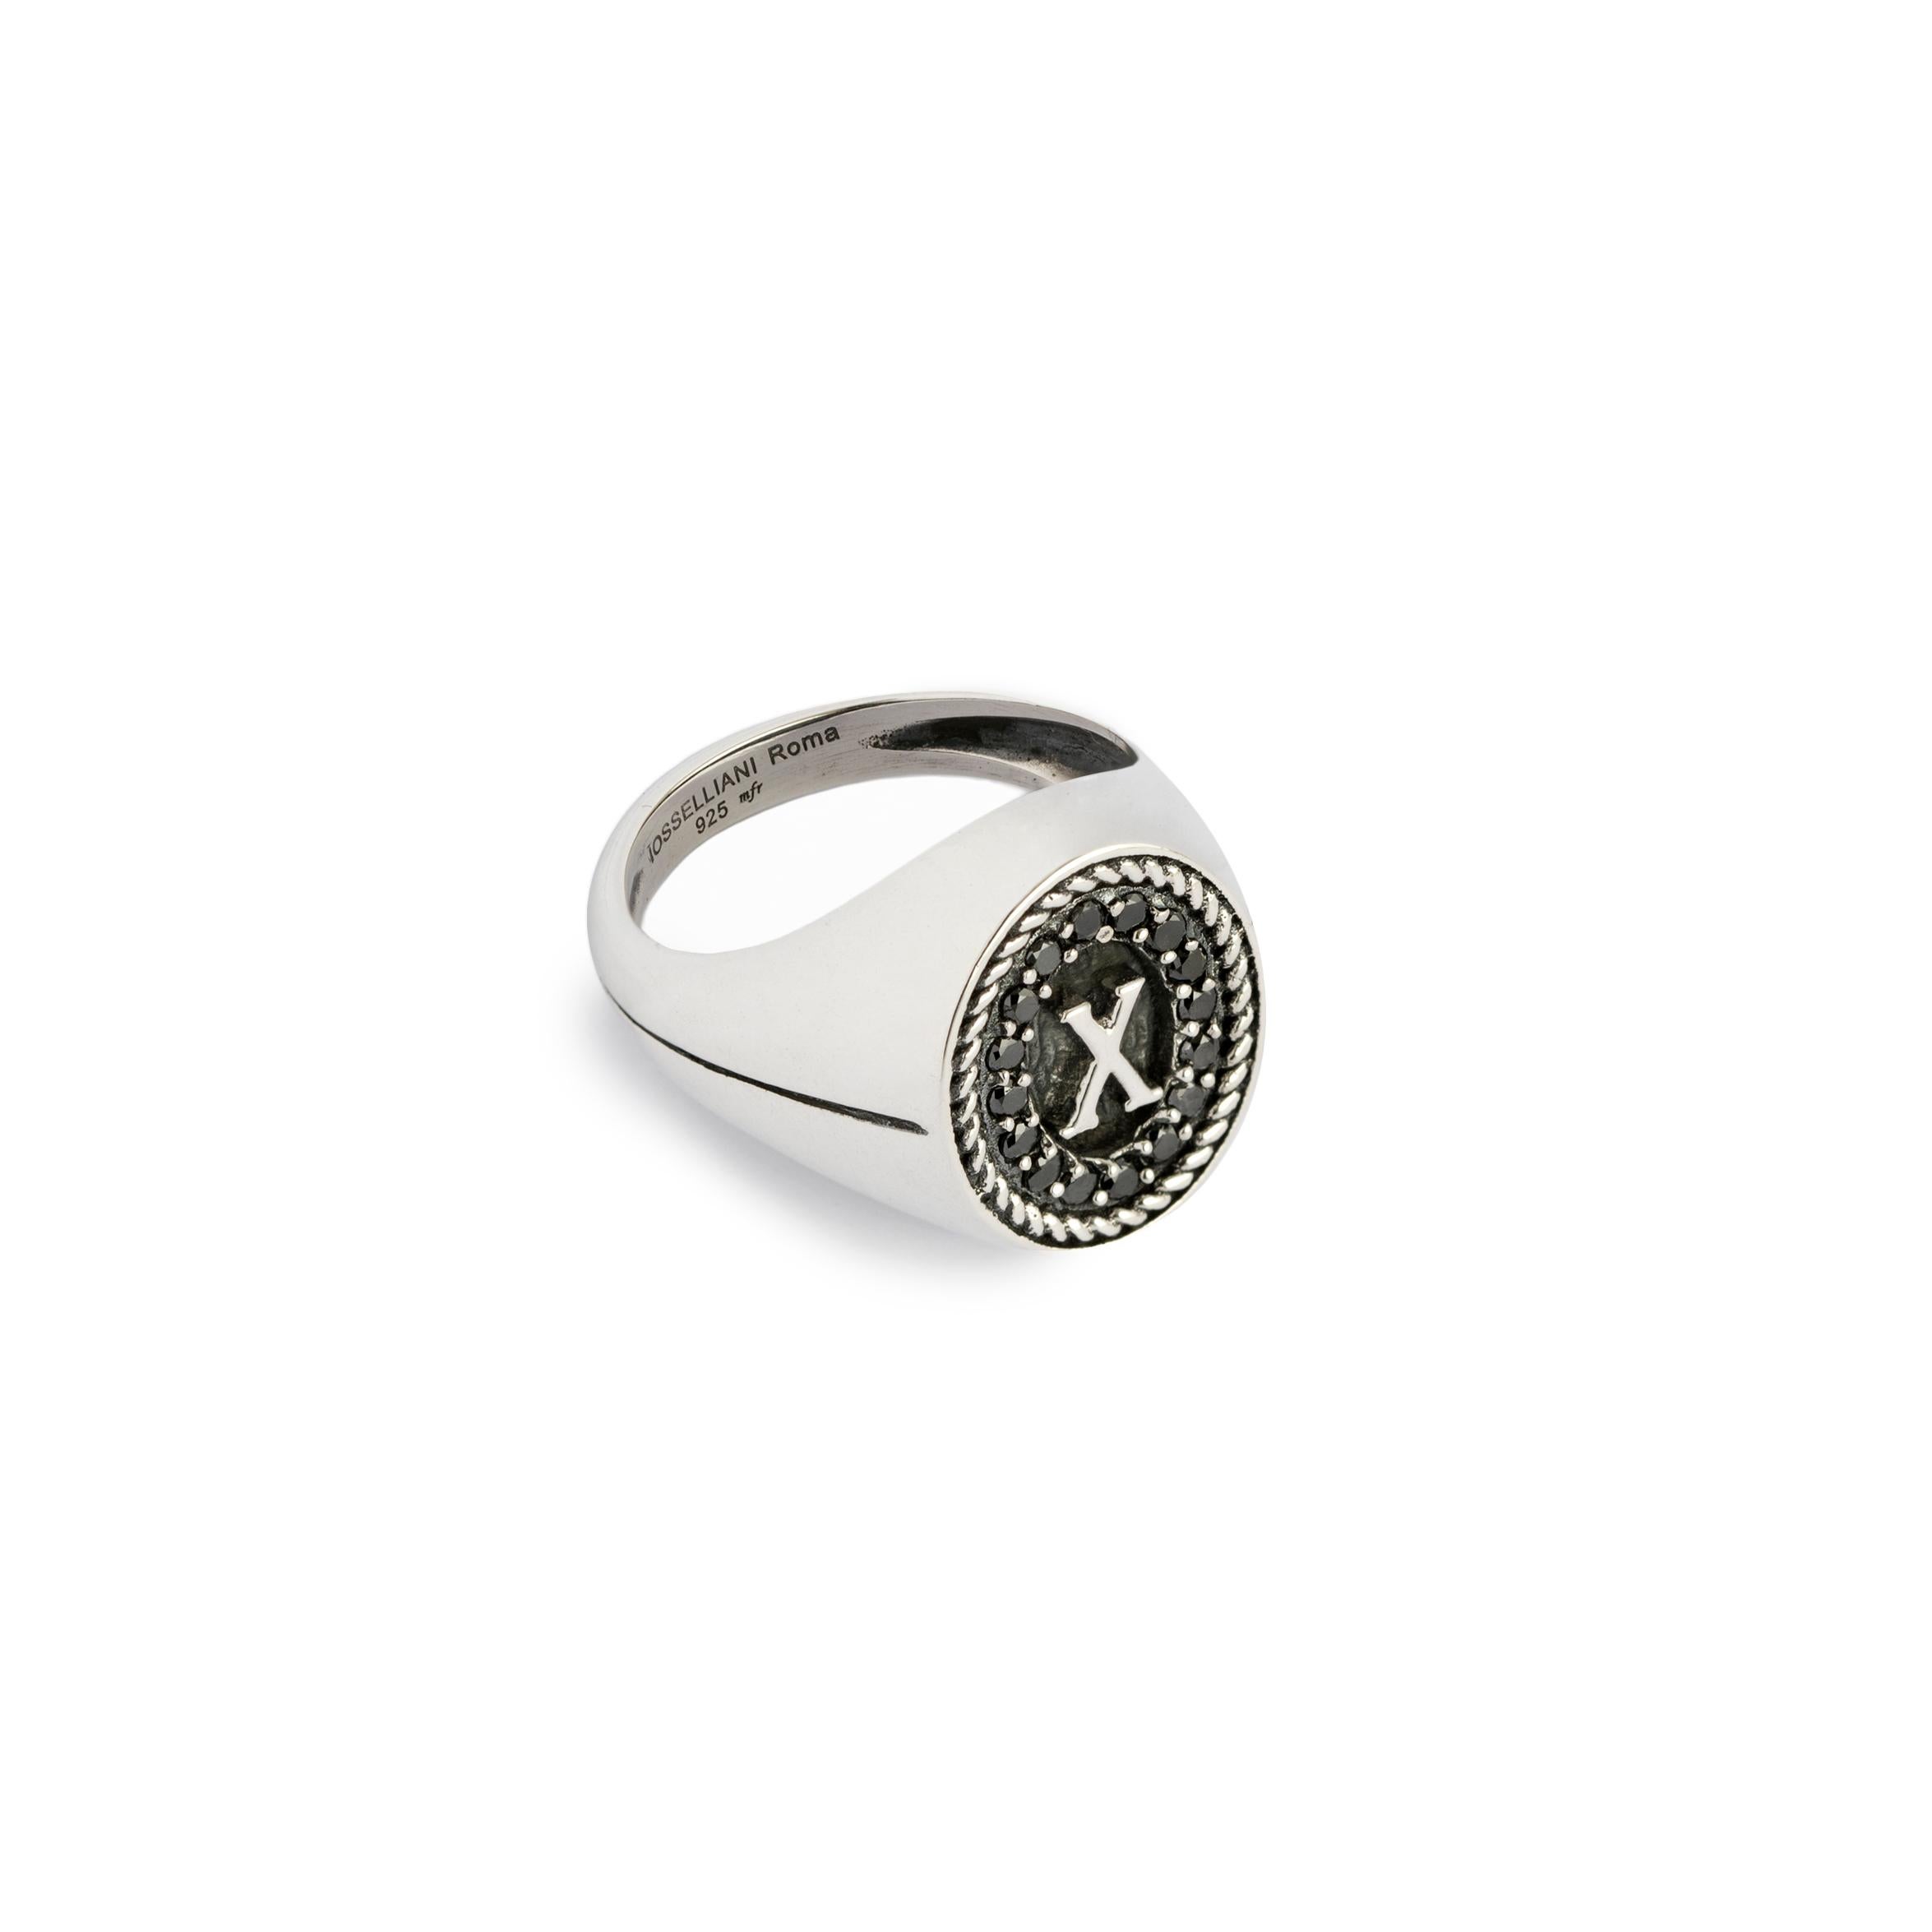 Contemporary Signet Ring with Initial with Black Diamond Pavé from Iosselliani